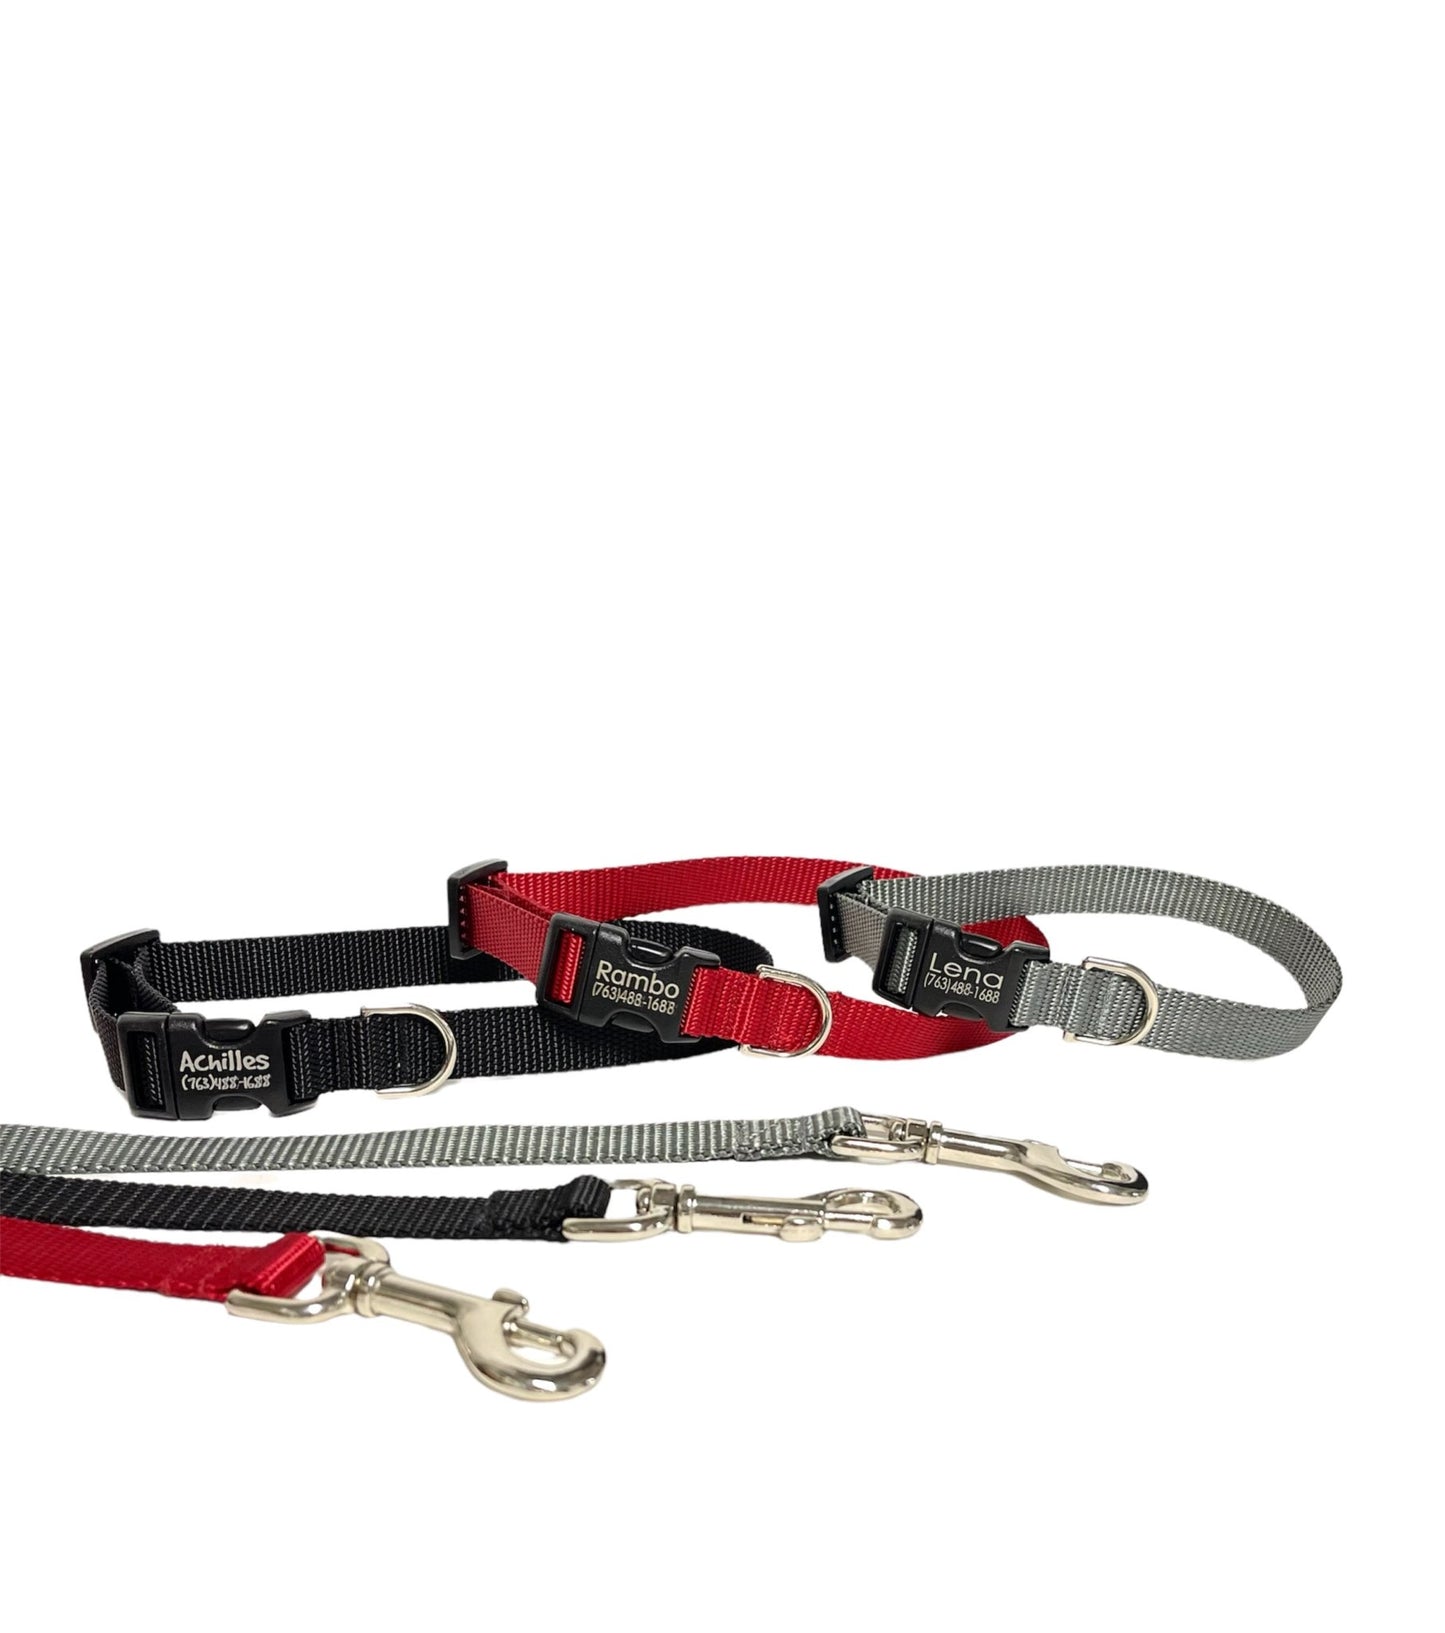 Nylon Dog Collar and Leash Set - Pick Your Color - muttsnbones